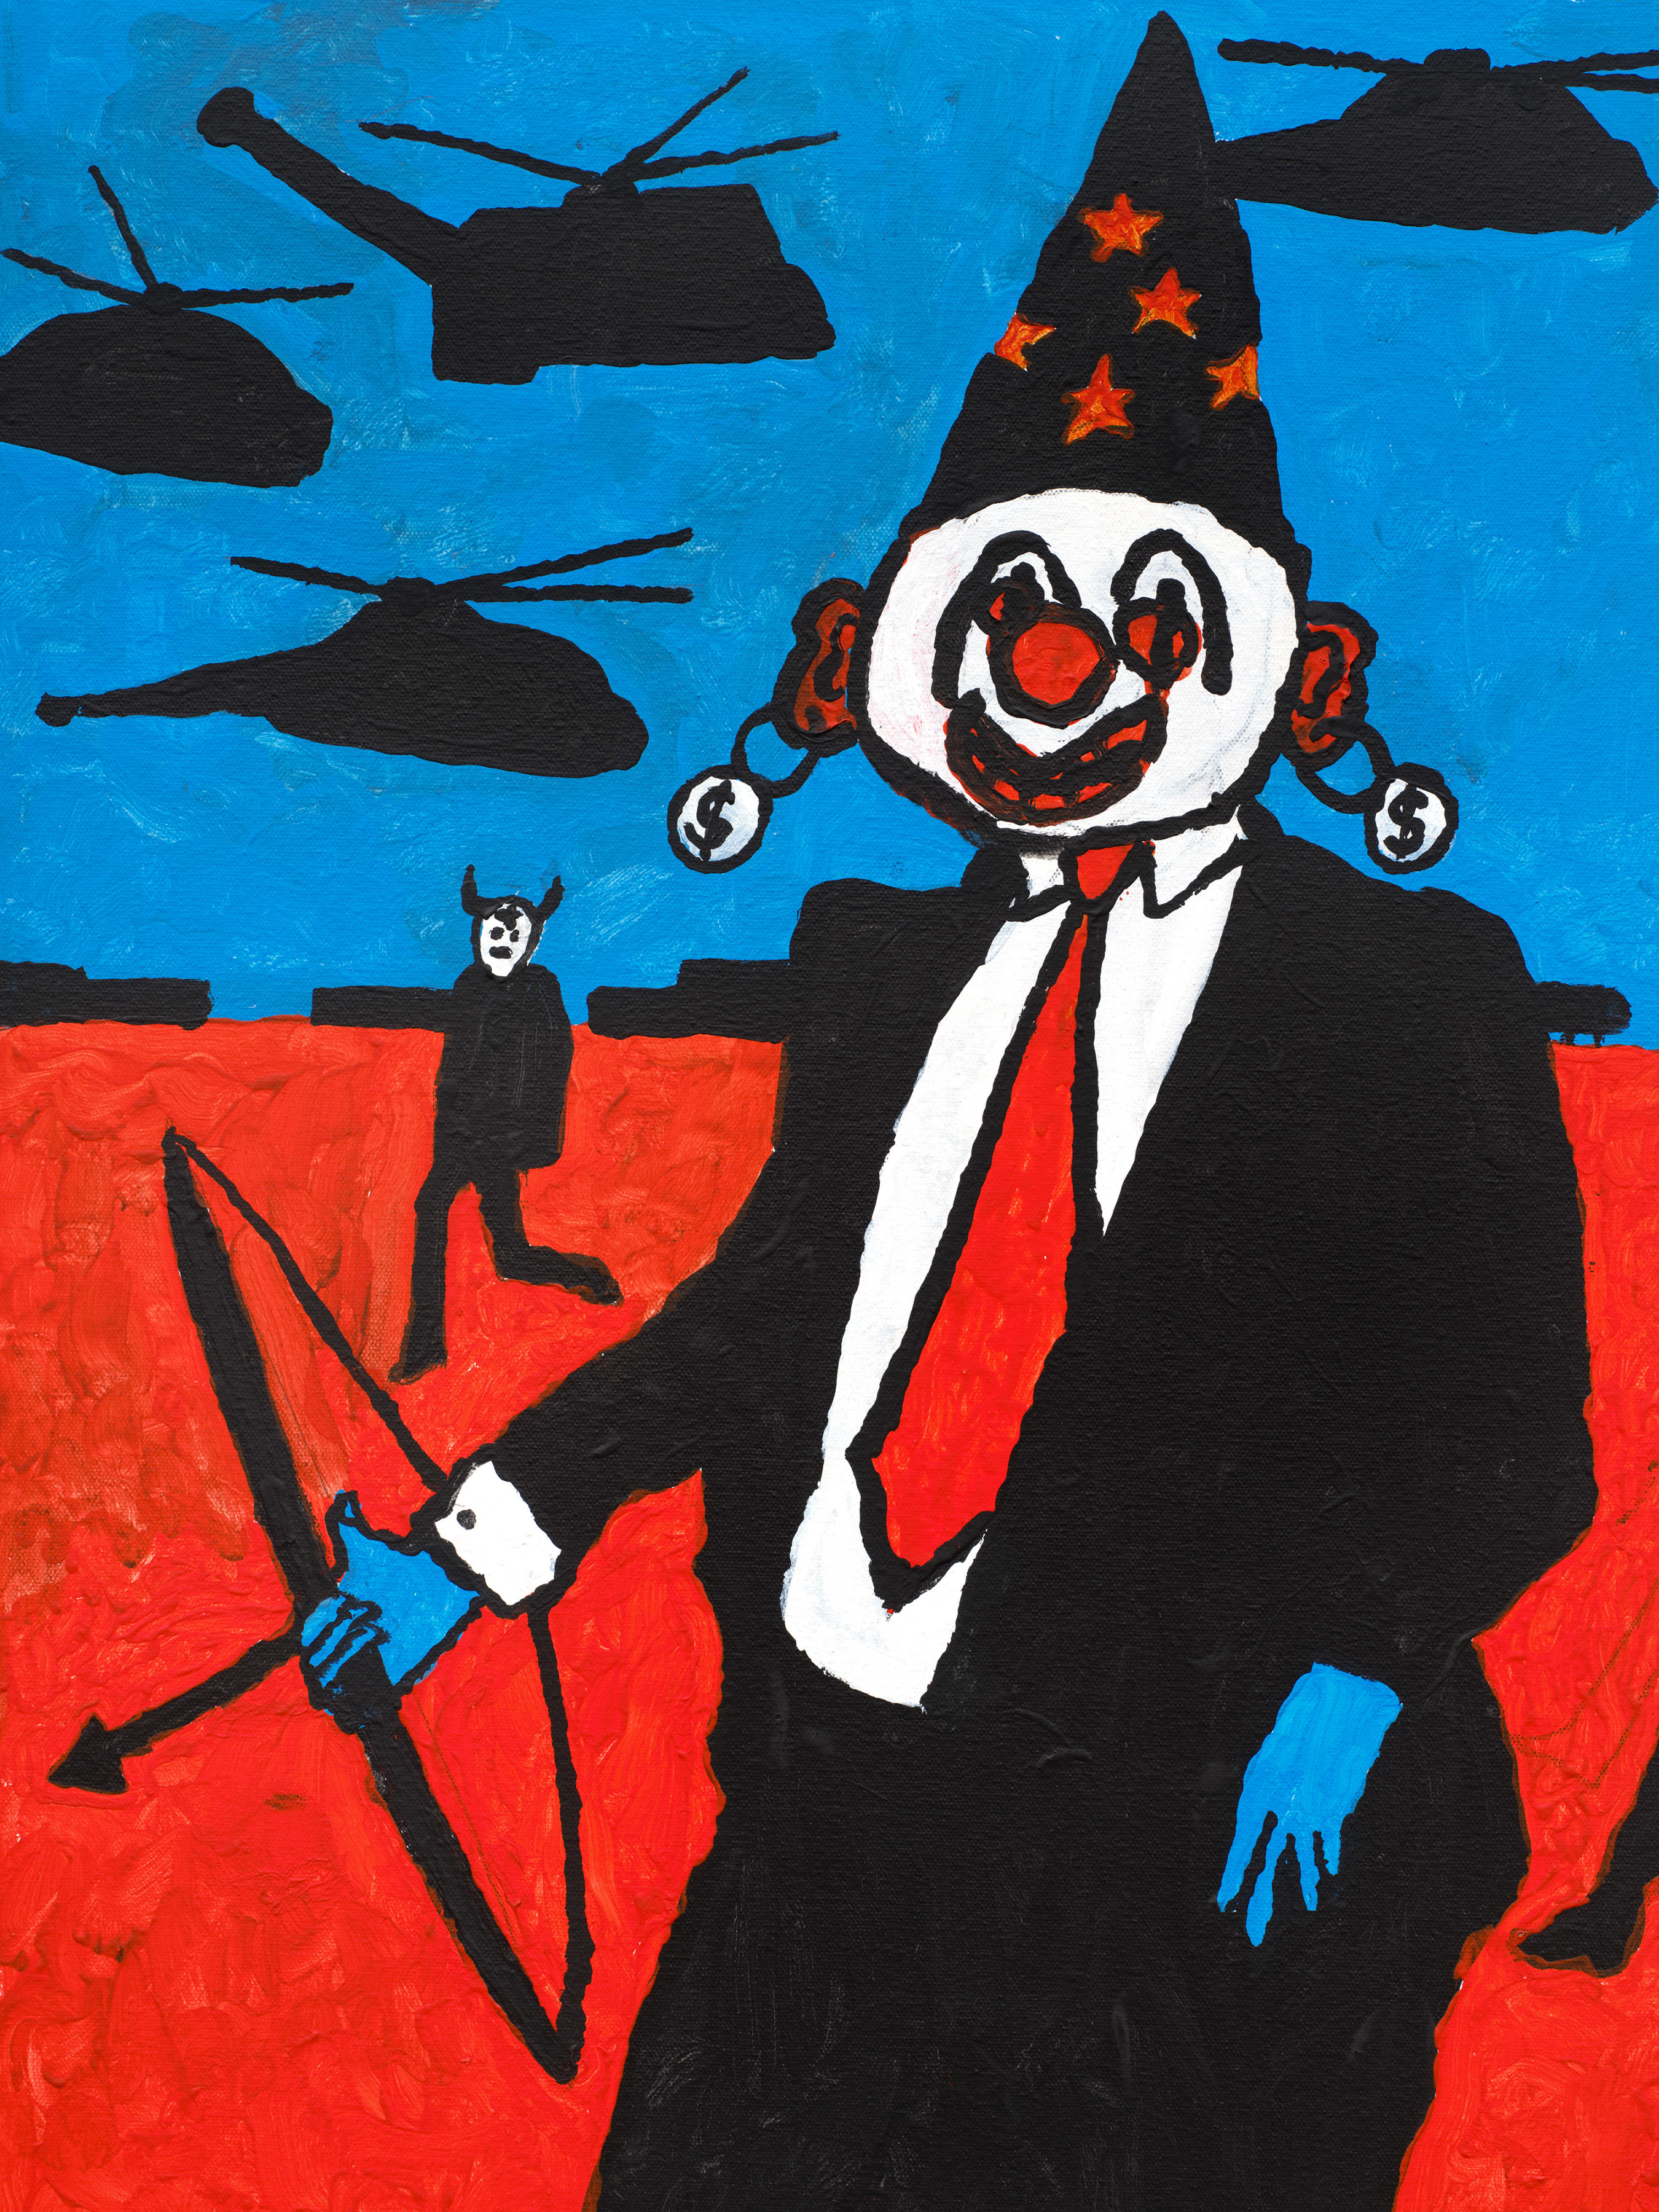 Detail of Derek Boshier's "Strange Lands: Donald Trump and Friends on Their Way to a National Security Meeting"